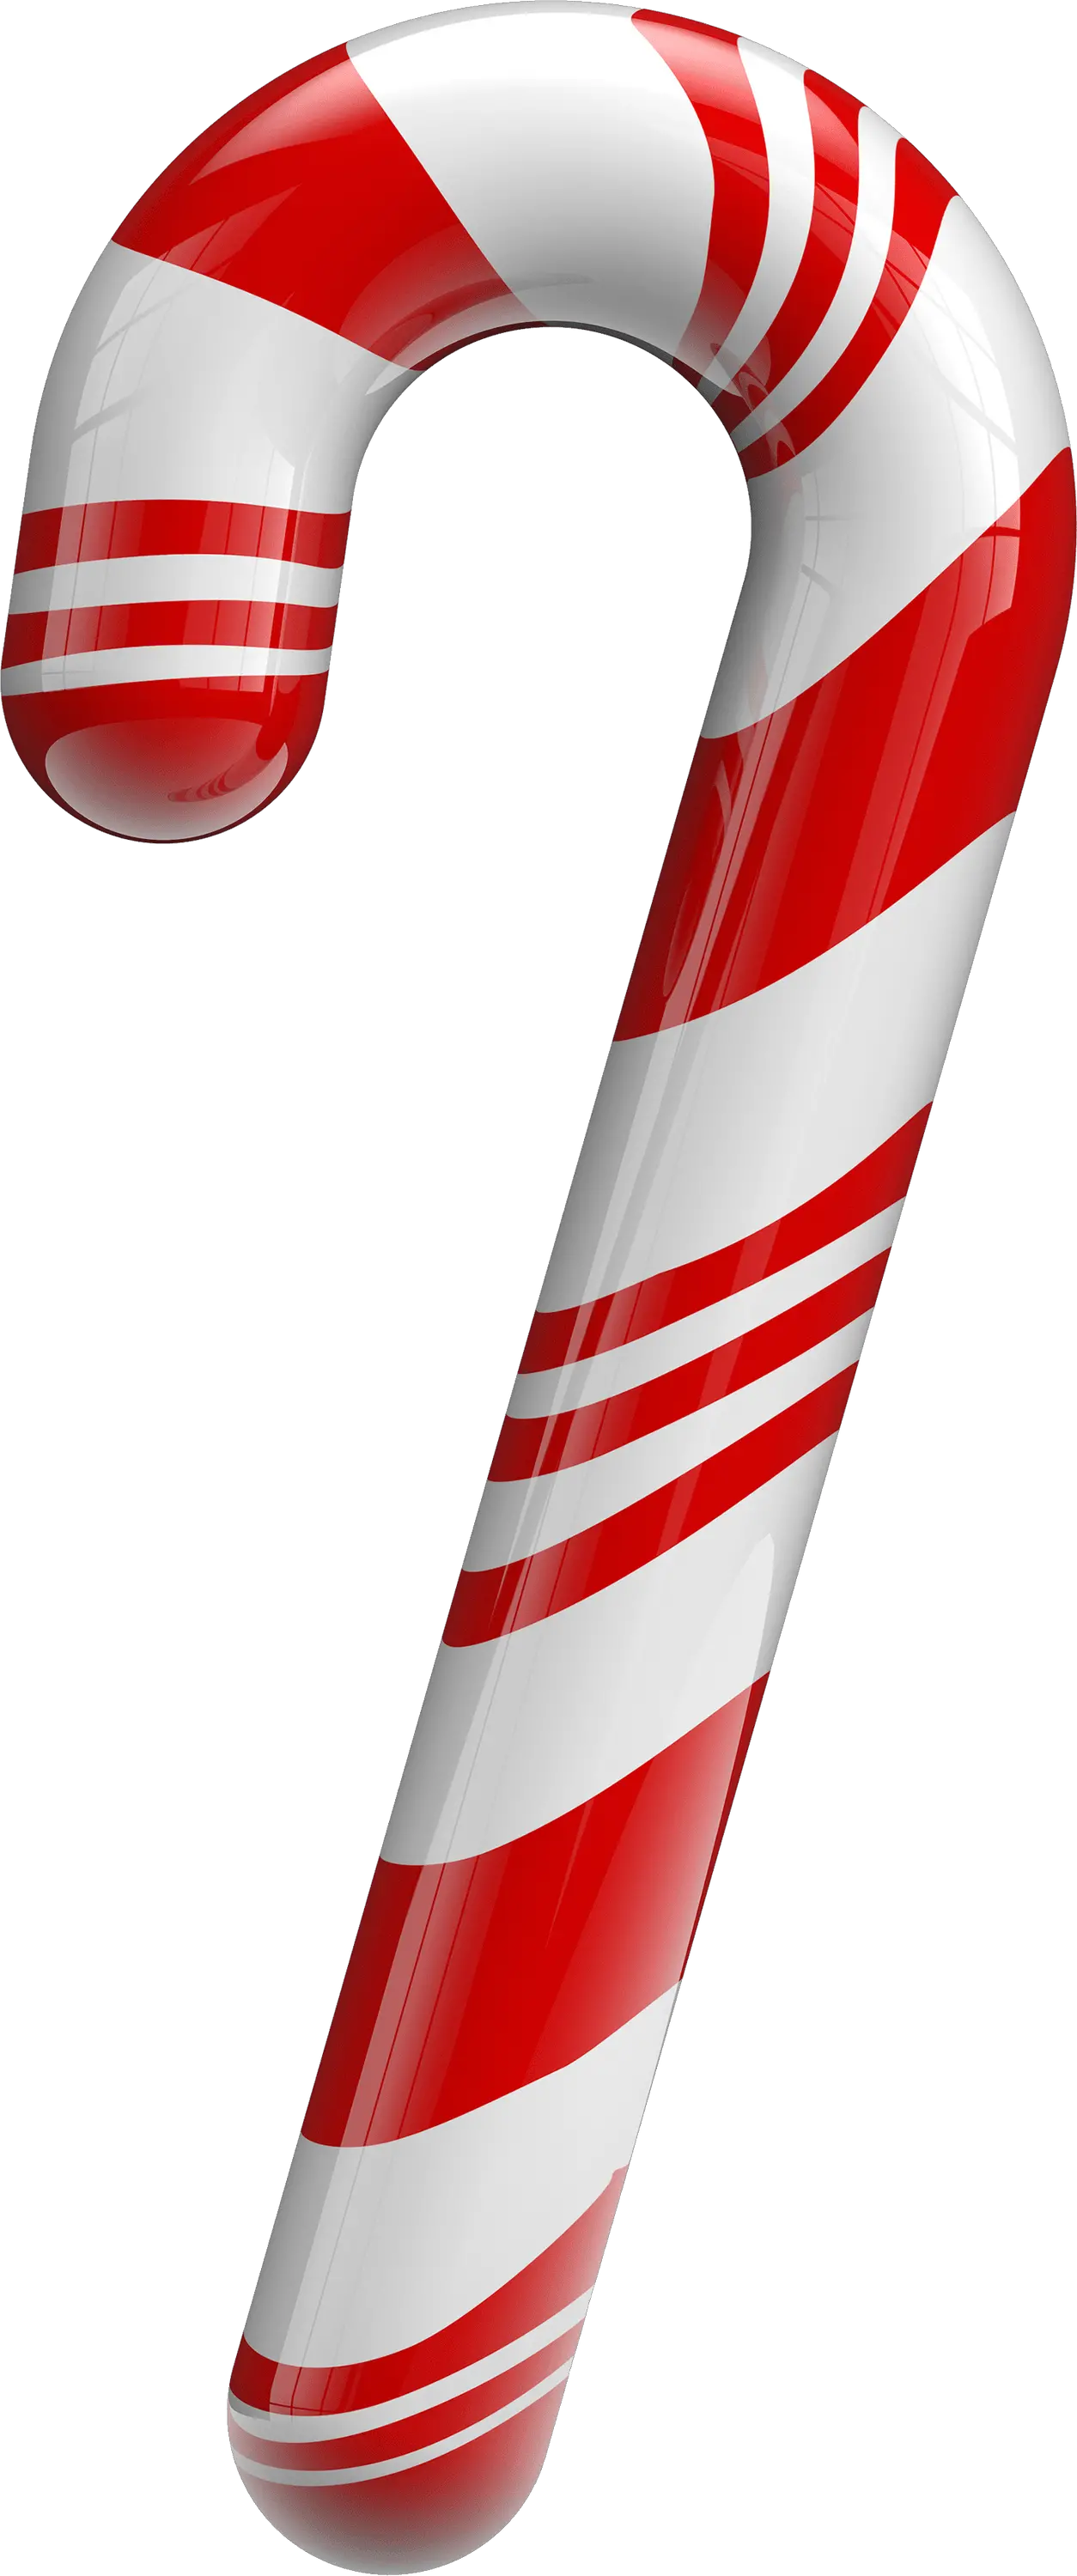 Traditional Christmas Sugar Cane Png Image Purepng Free Cane Png